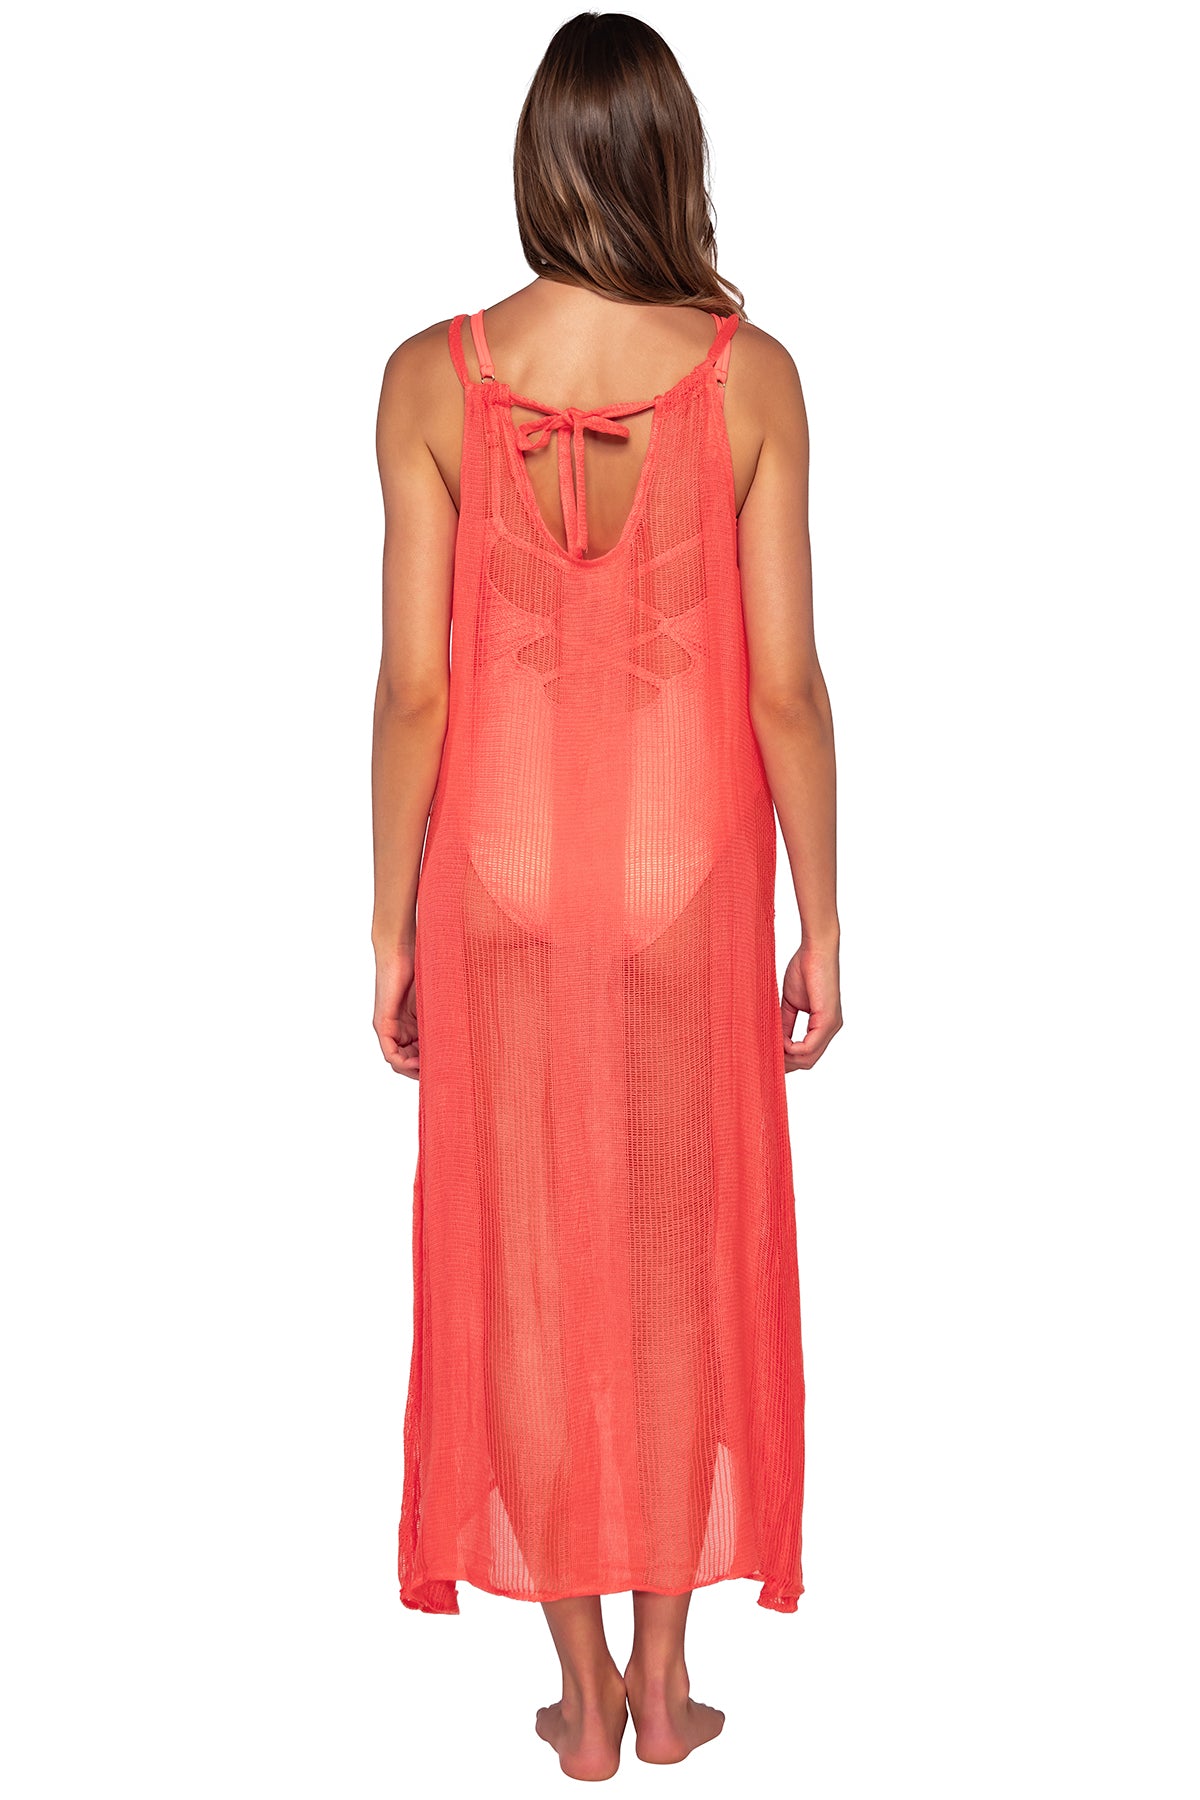 Back view of Sunsets Neon Coral Destination Dress